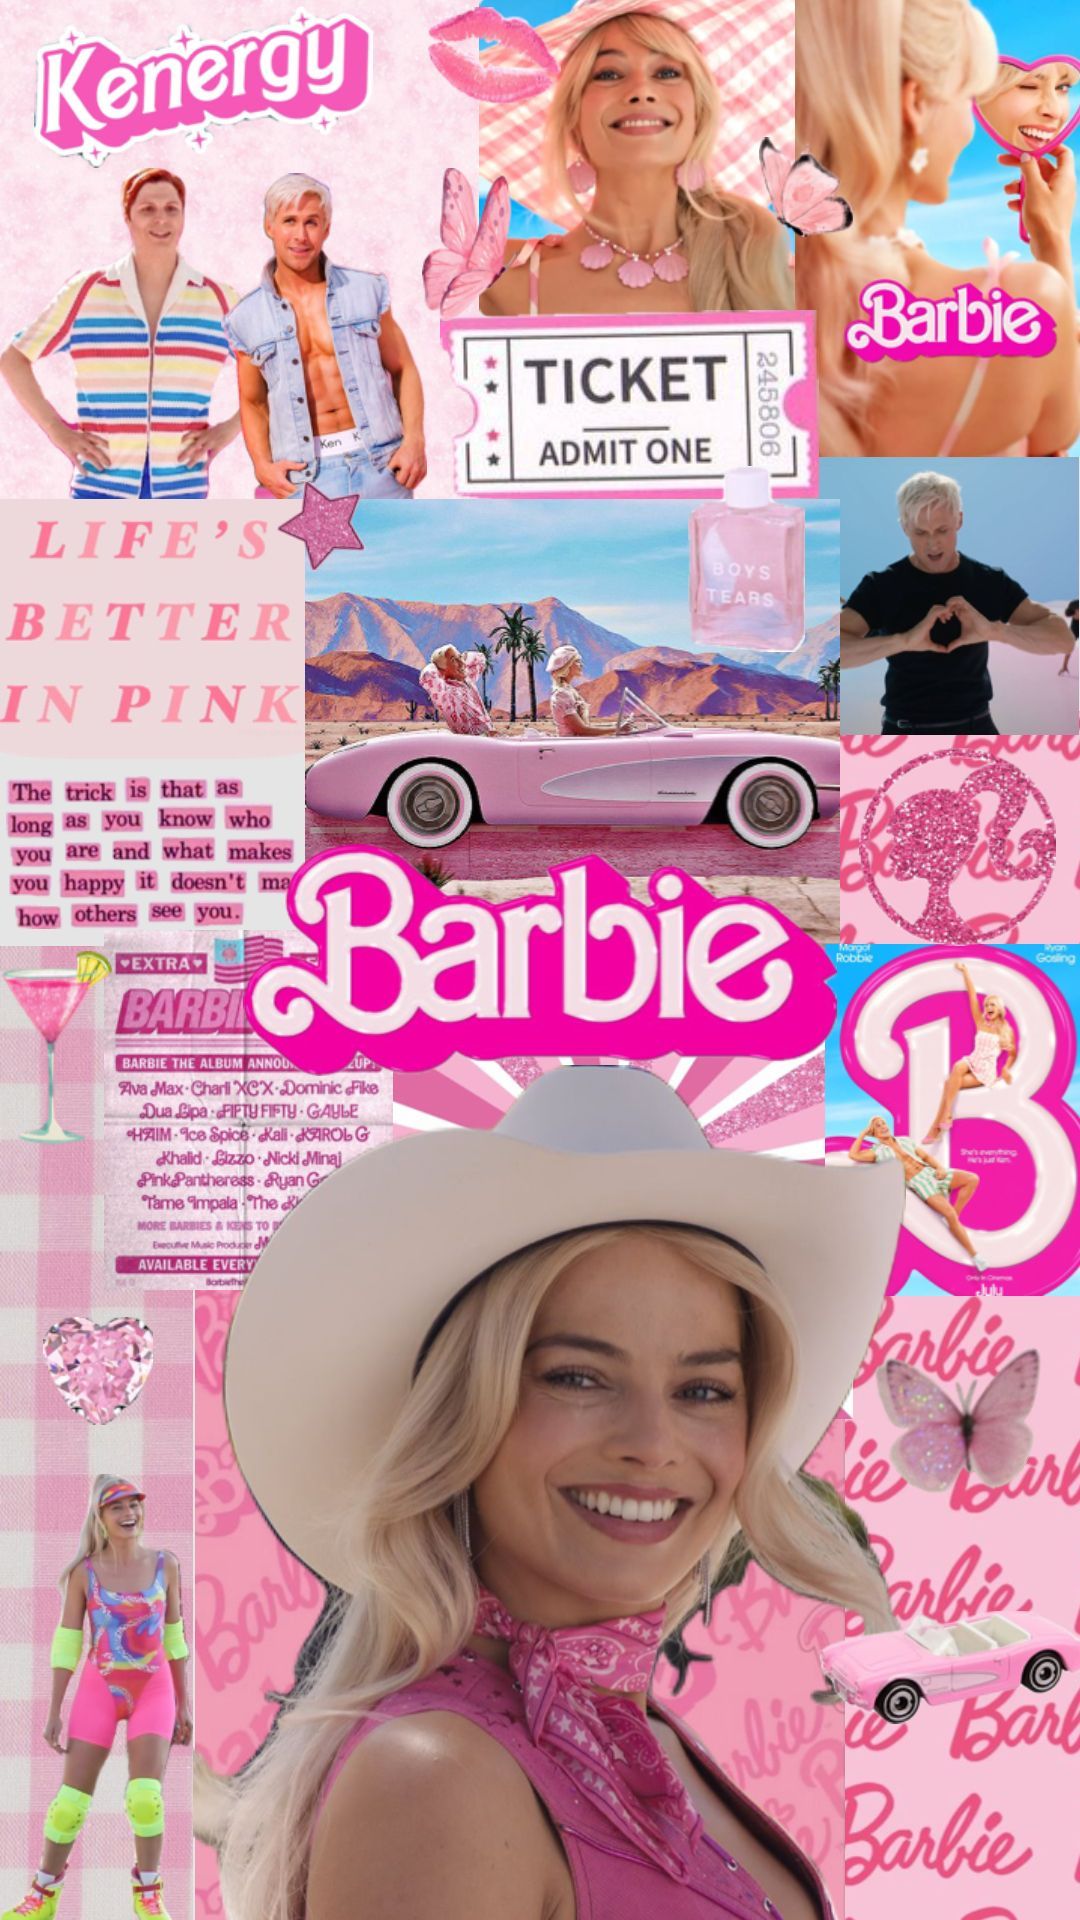 Aesthetic wallpaper of Barbie in pink with a collage of images of the doll. - Barbie